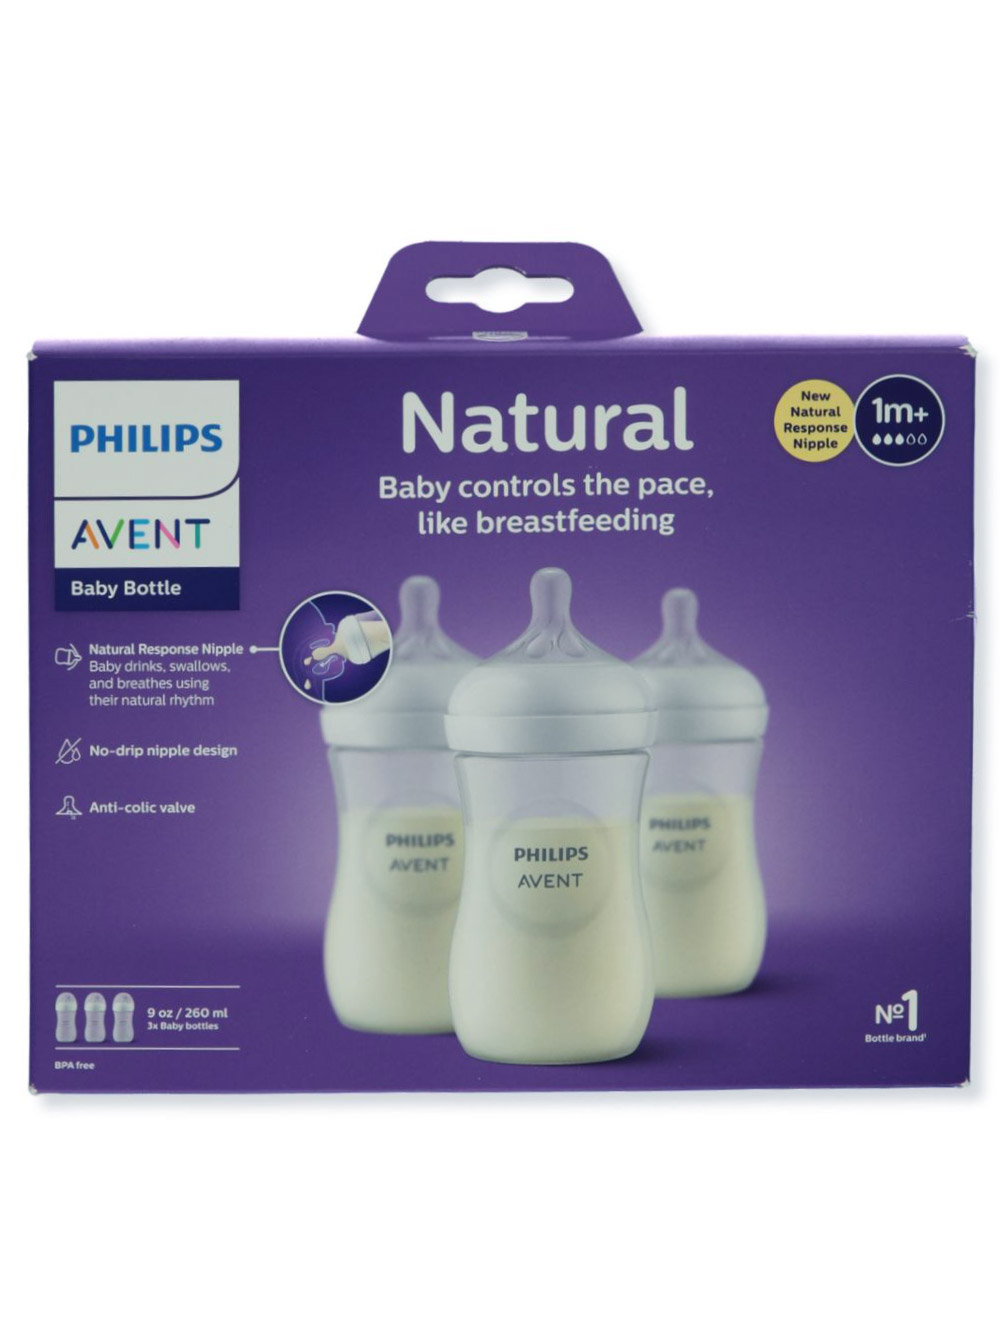 Philips AVENT BPA Free Natural Polypropylene Bottle, 4 Ounce, 1 Pack